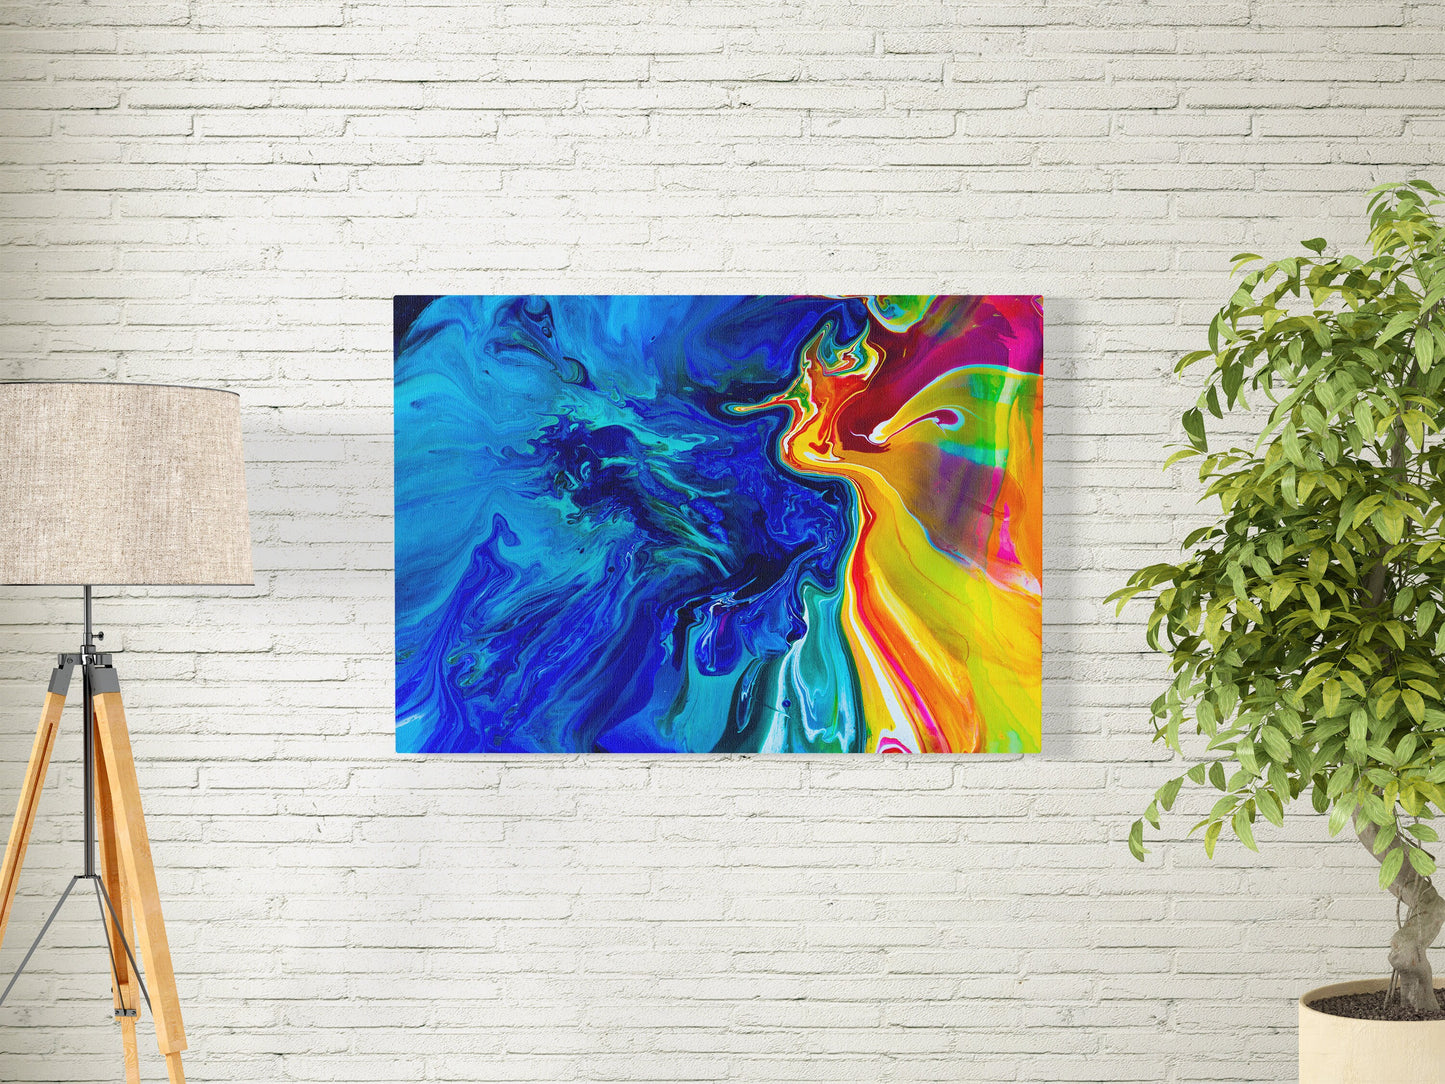 Abstract canvas or Framed Art or Art Print Artsy colorful blue yellow artwork seahorse ocean heart red